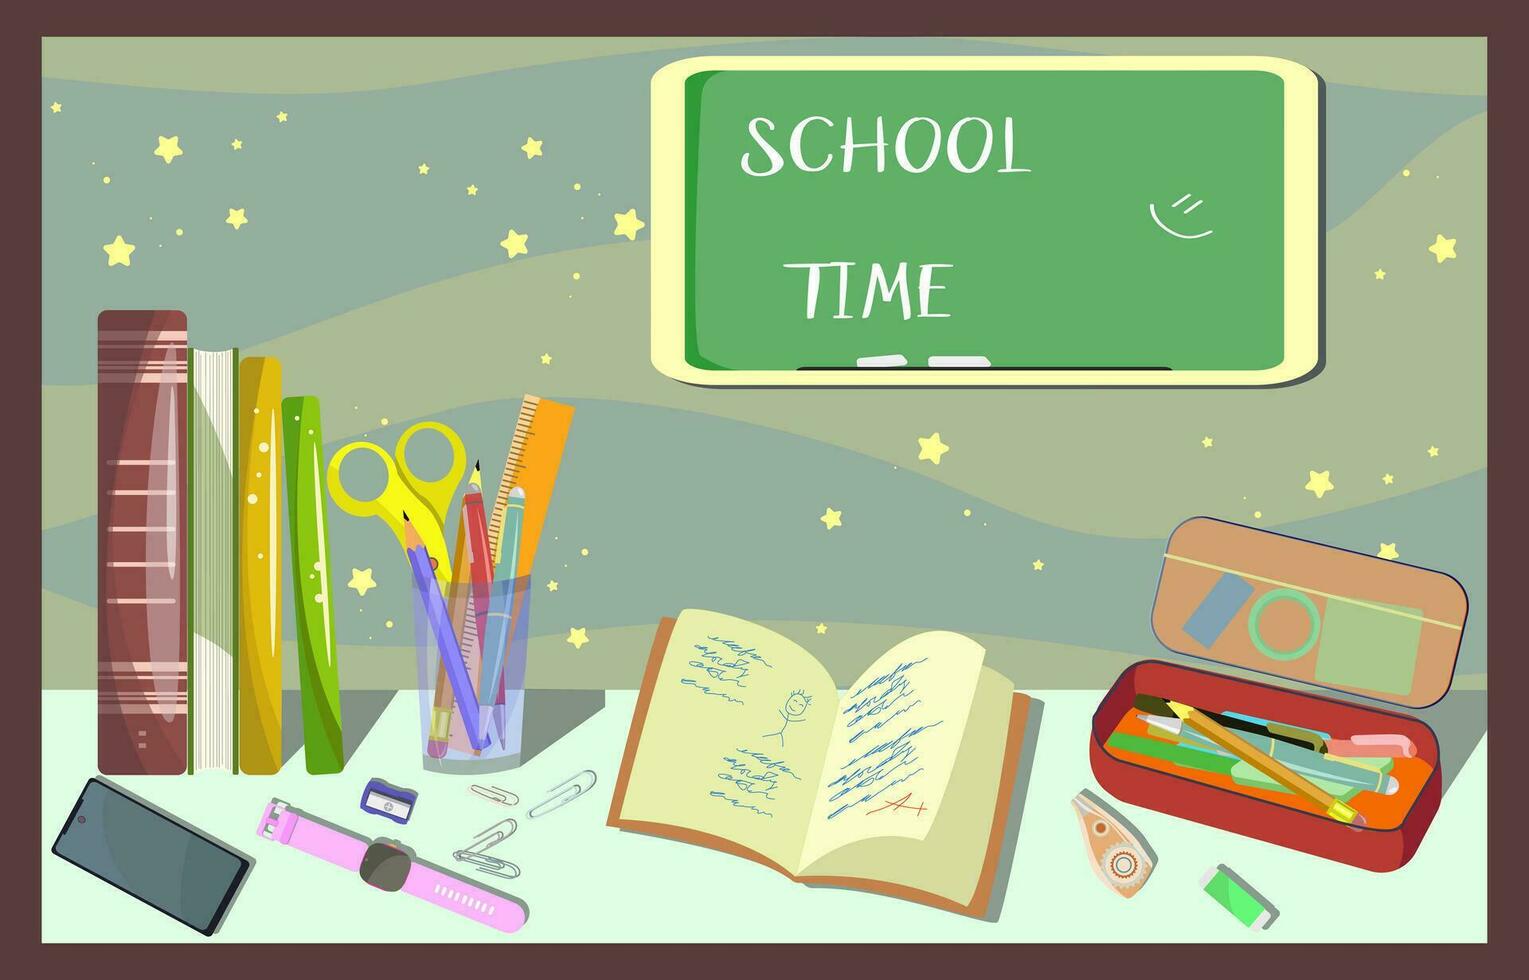 School time, Realistic vector of subjects to study, Application for posters, Banners and postcards, Childrens bright illustration. Pencil case, Chalk board, Time to study